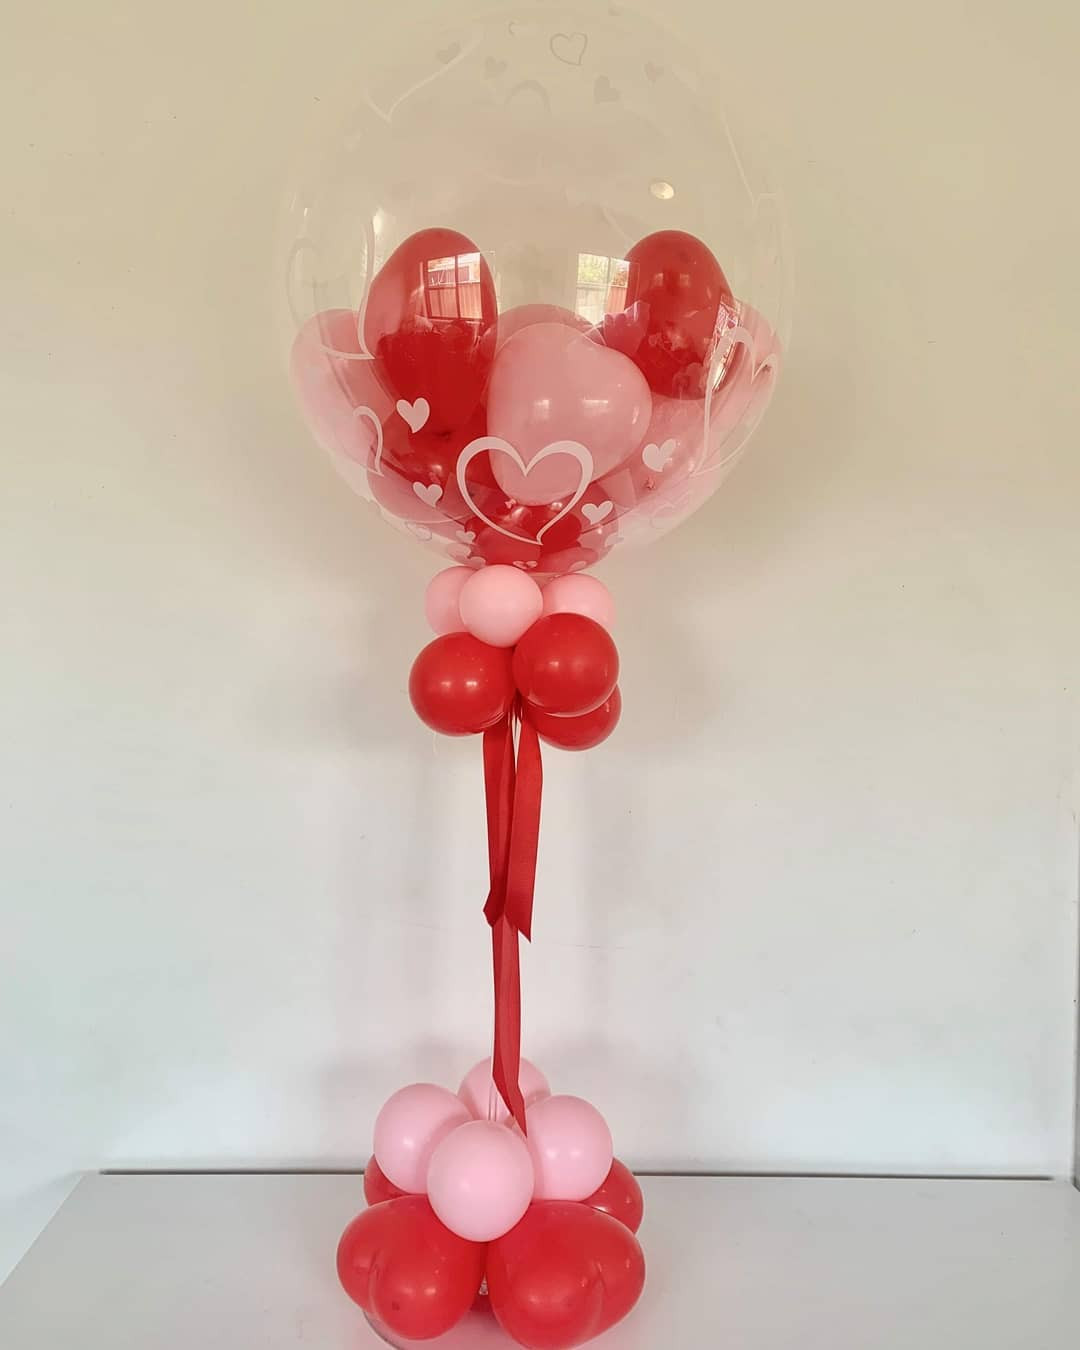 35 Valentine's Day Balloons Ideas You Haven't Tried Yet,valentine party decorations,love balloons,valentines hanging decorations